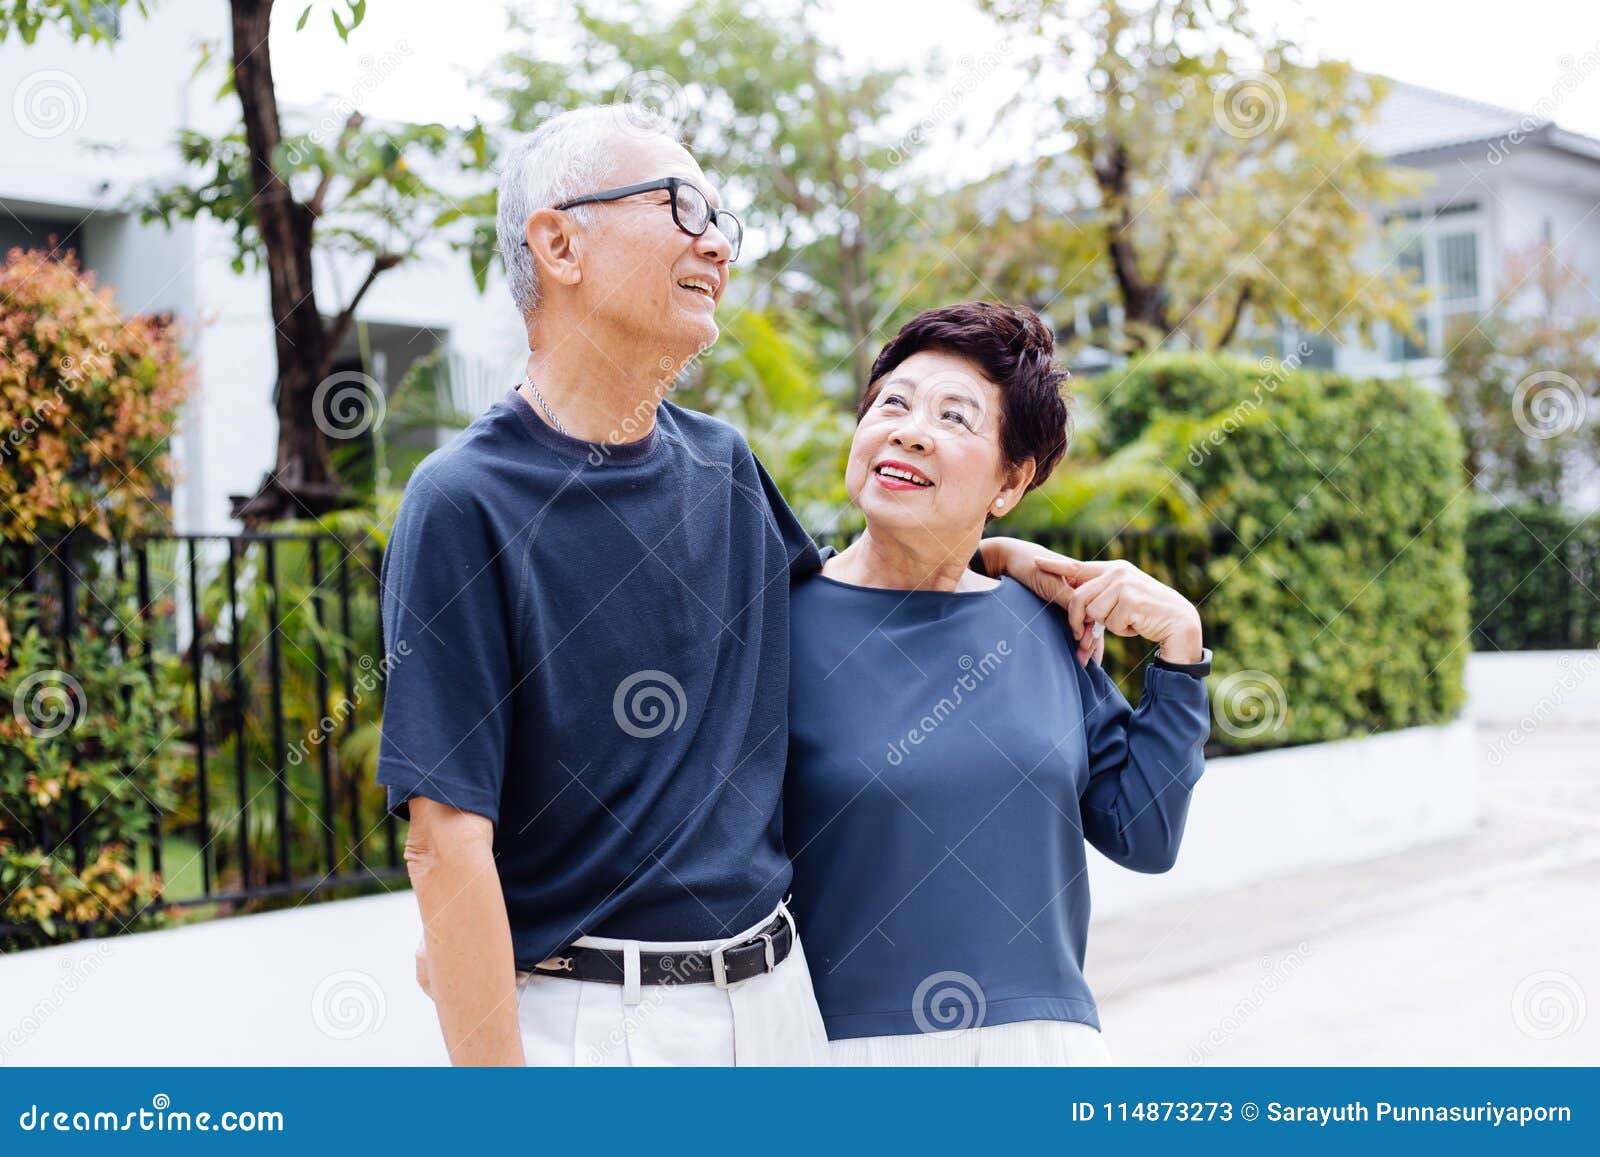 happy retired senior asian couple walking and looking at each other with romance in outdoor park and house in background.